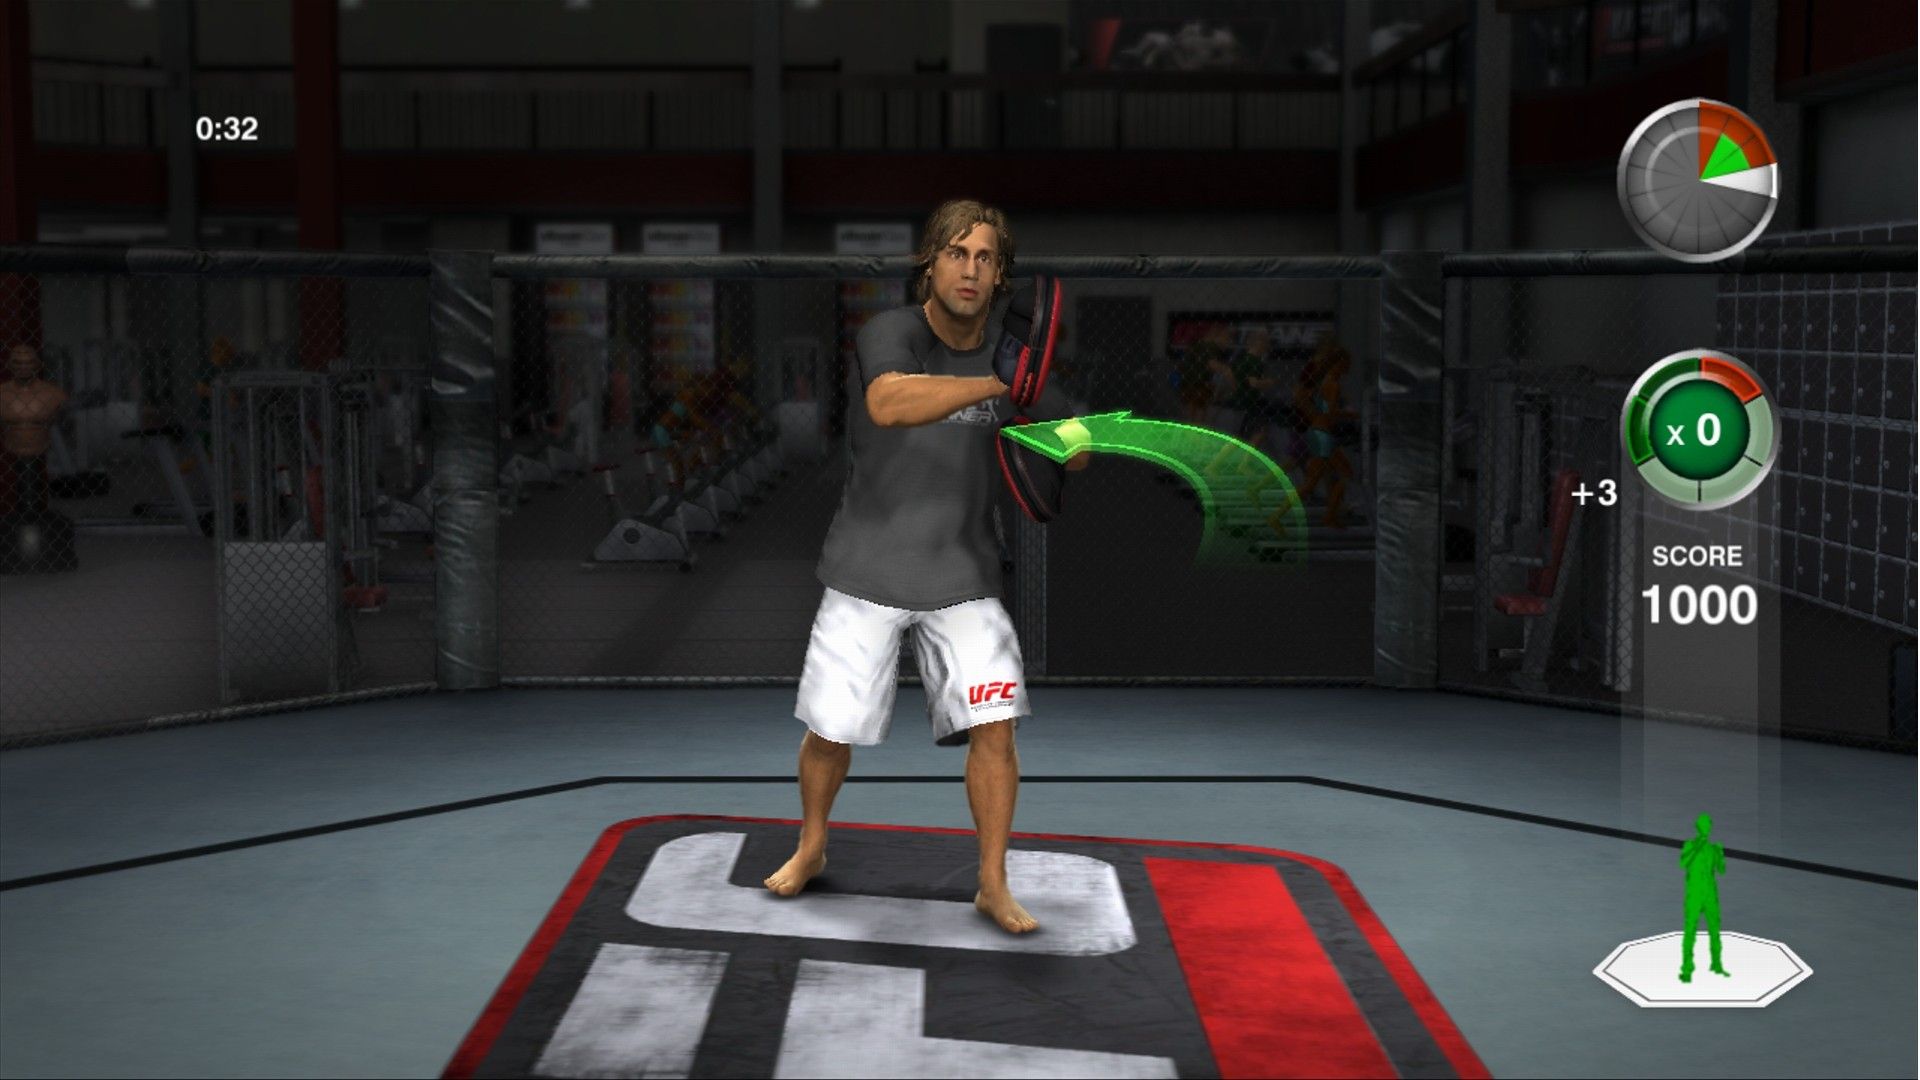 Игры том 1000. UFC personal Trainer. Xbox 360 Kinect UFC personal Trainer the Ultimate Fitness System. Personal Trainer личный тренер игра. UFC personal Trainer Xbox 360.